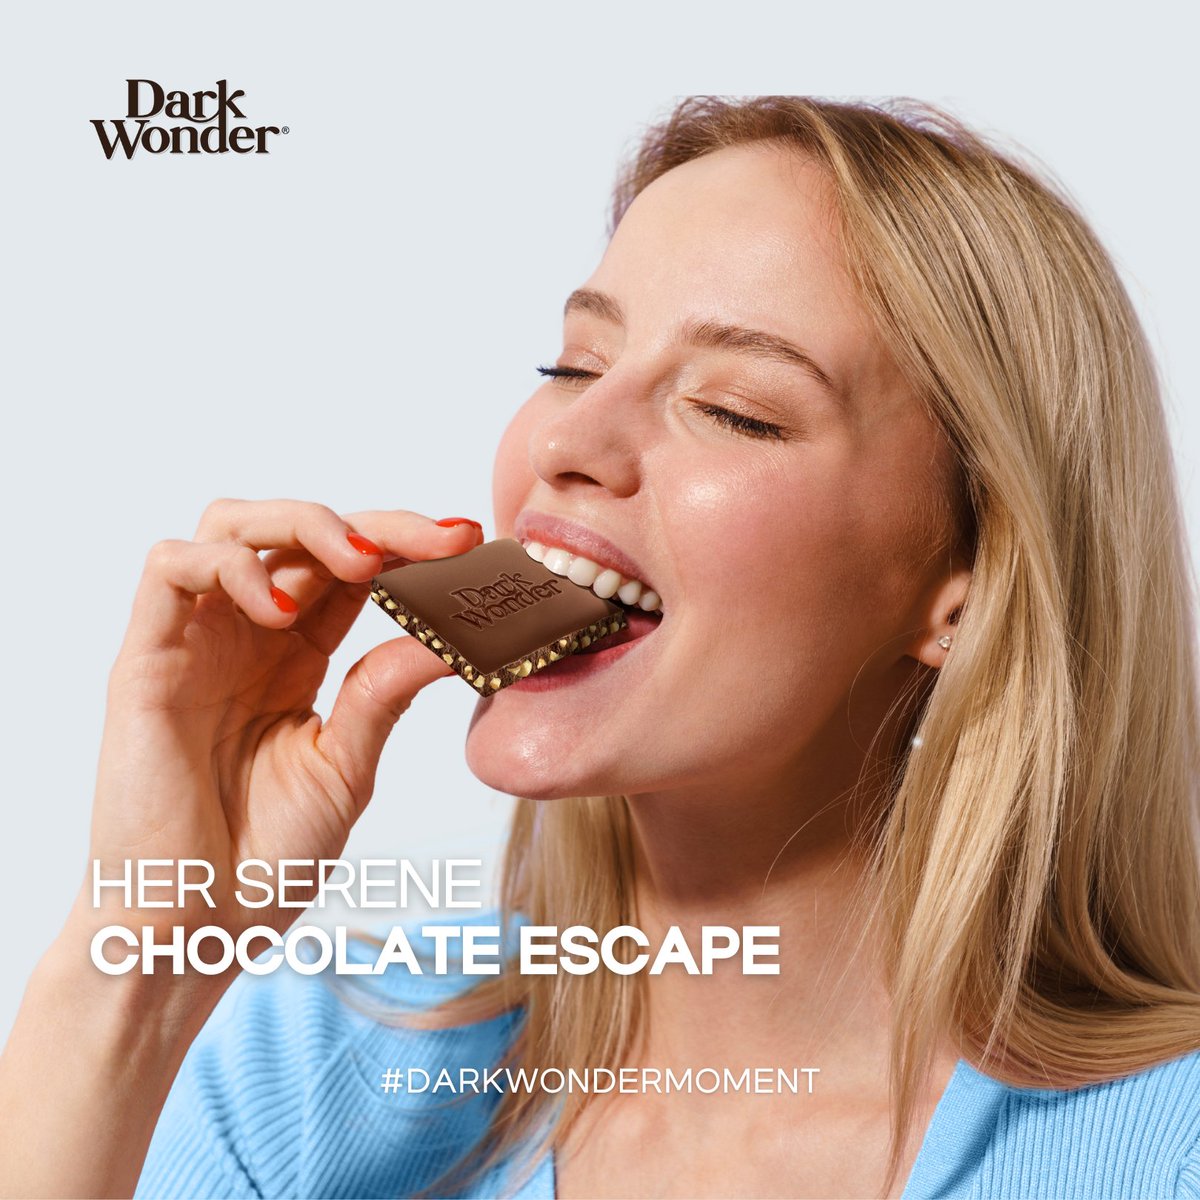 Her sanctuary in every bite: eyes closed, world faded, savoring her serene chocolate escape with Dark Wonder. 🍫😌

#DarkWonder #DarkWonderChocolate #MakesMeWonder #DarkWonderMoment